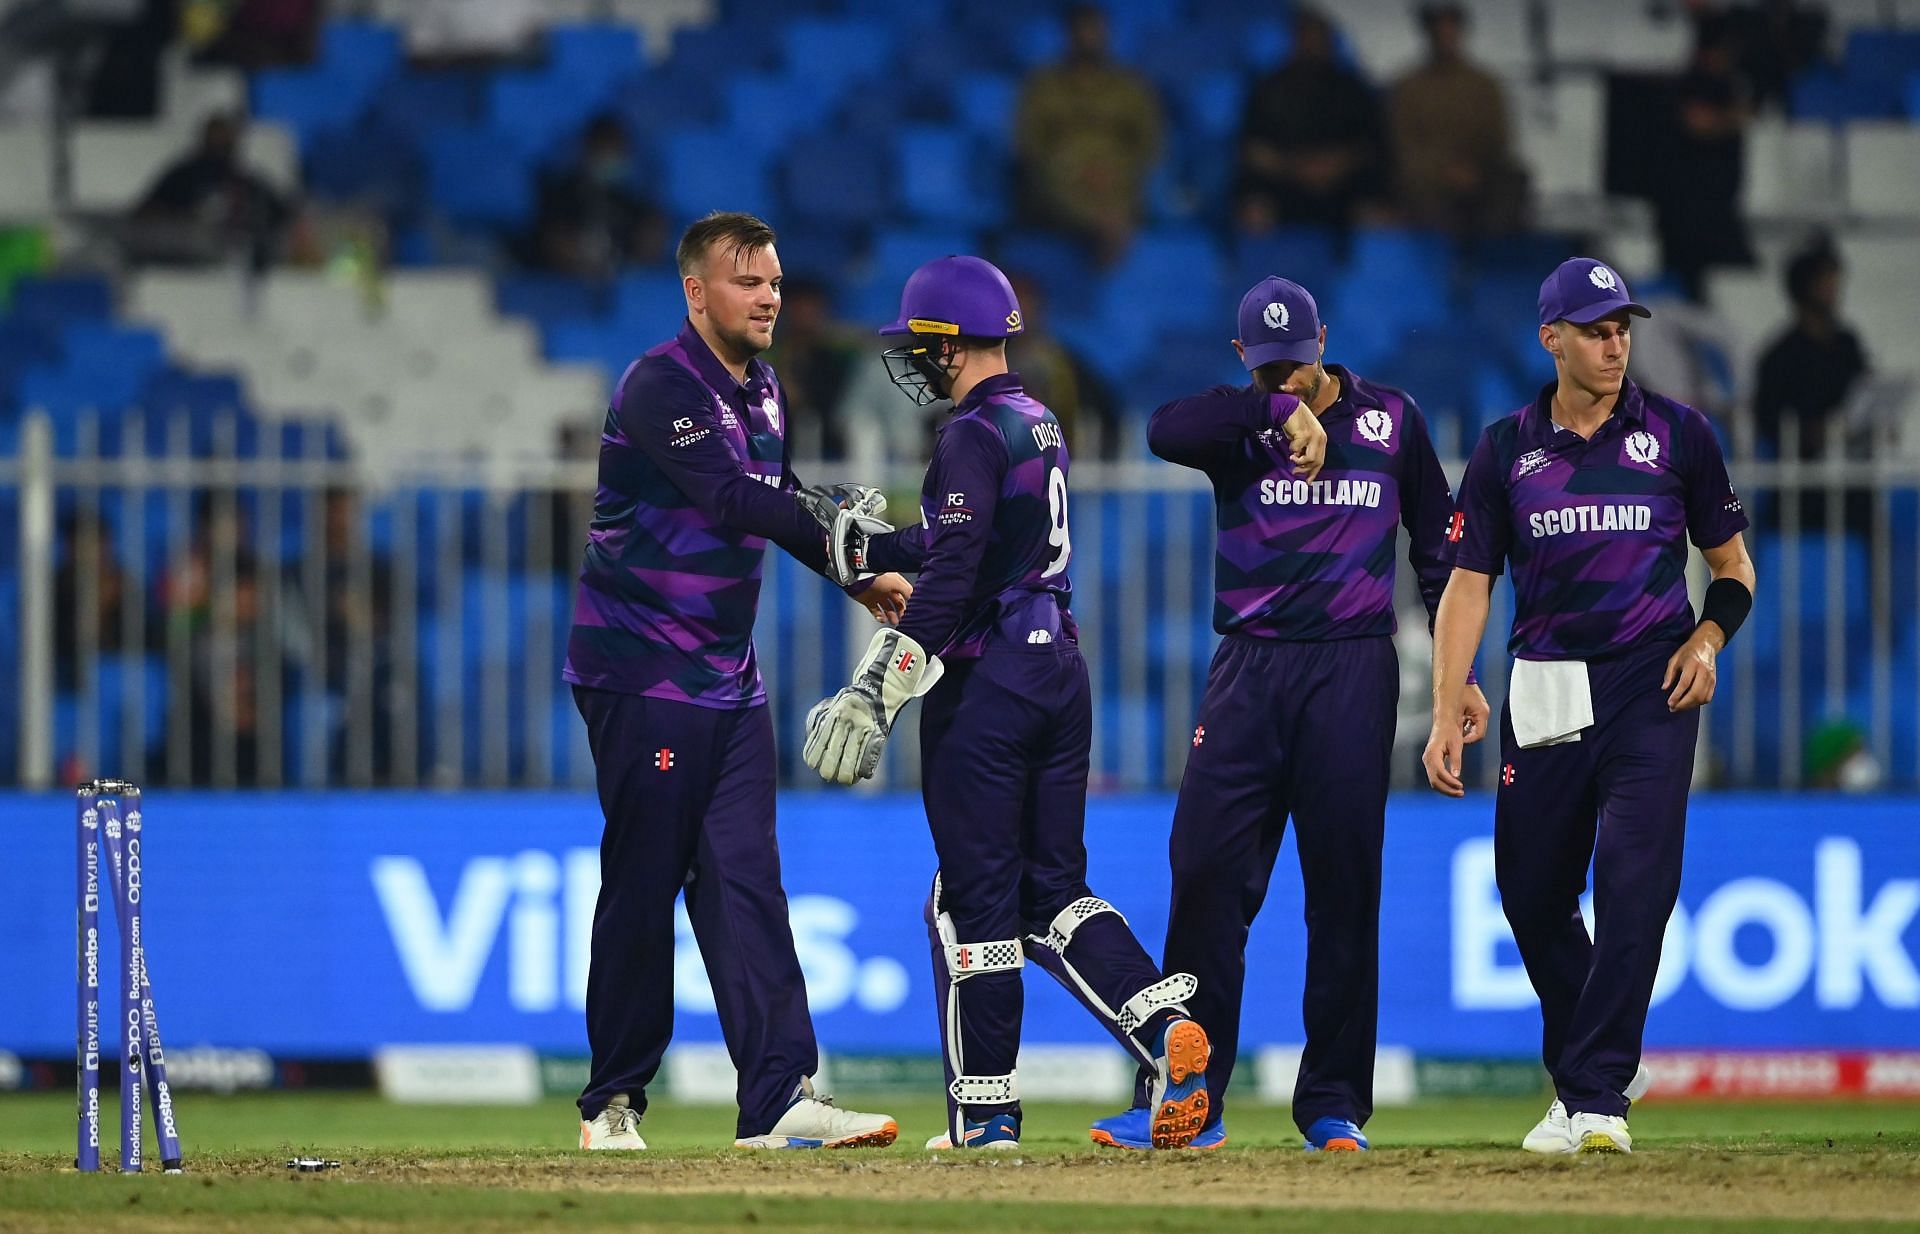 Scotland players during the match against Afghanistan. Pic: Getty Images